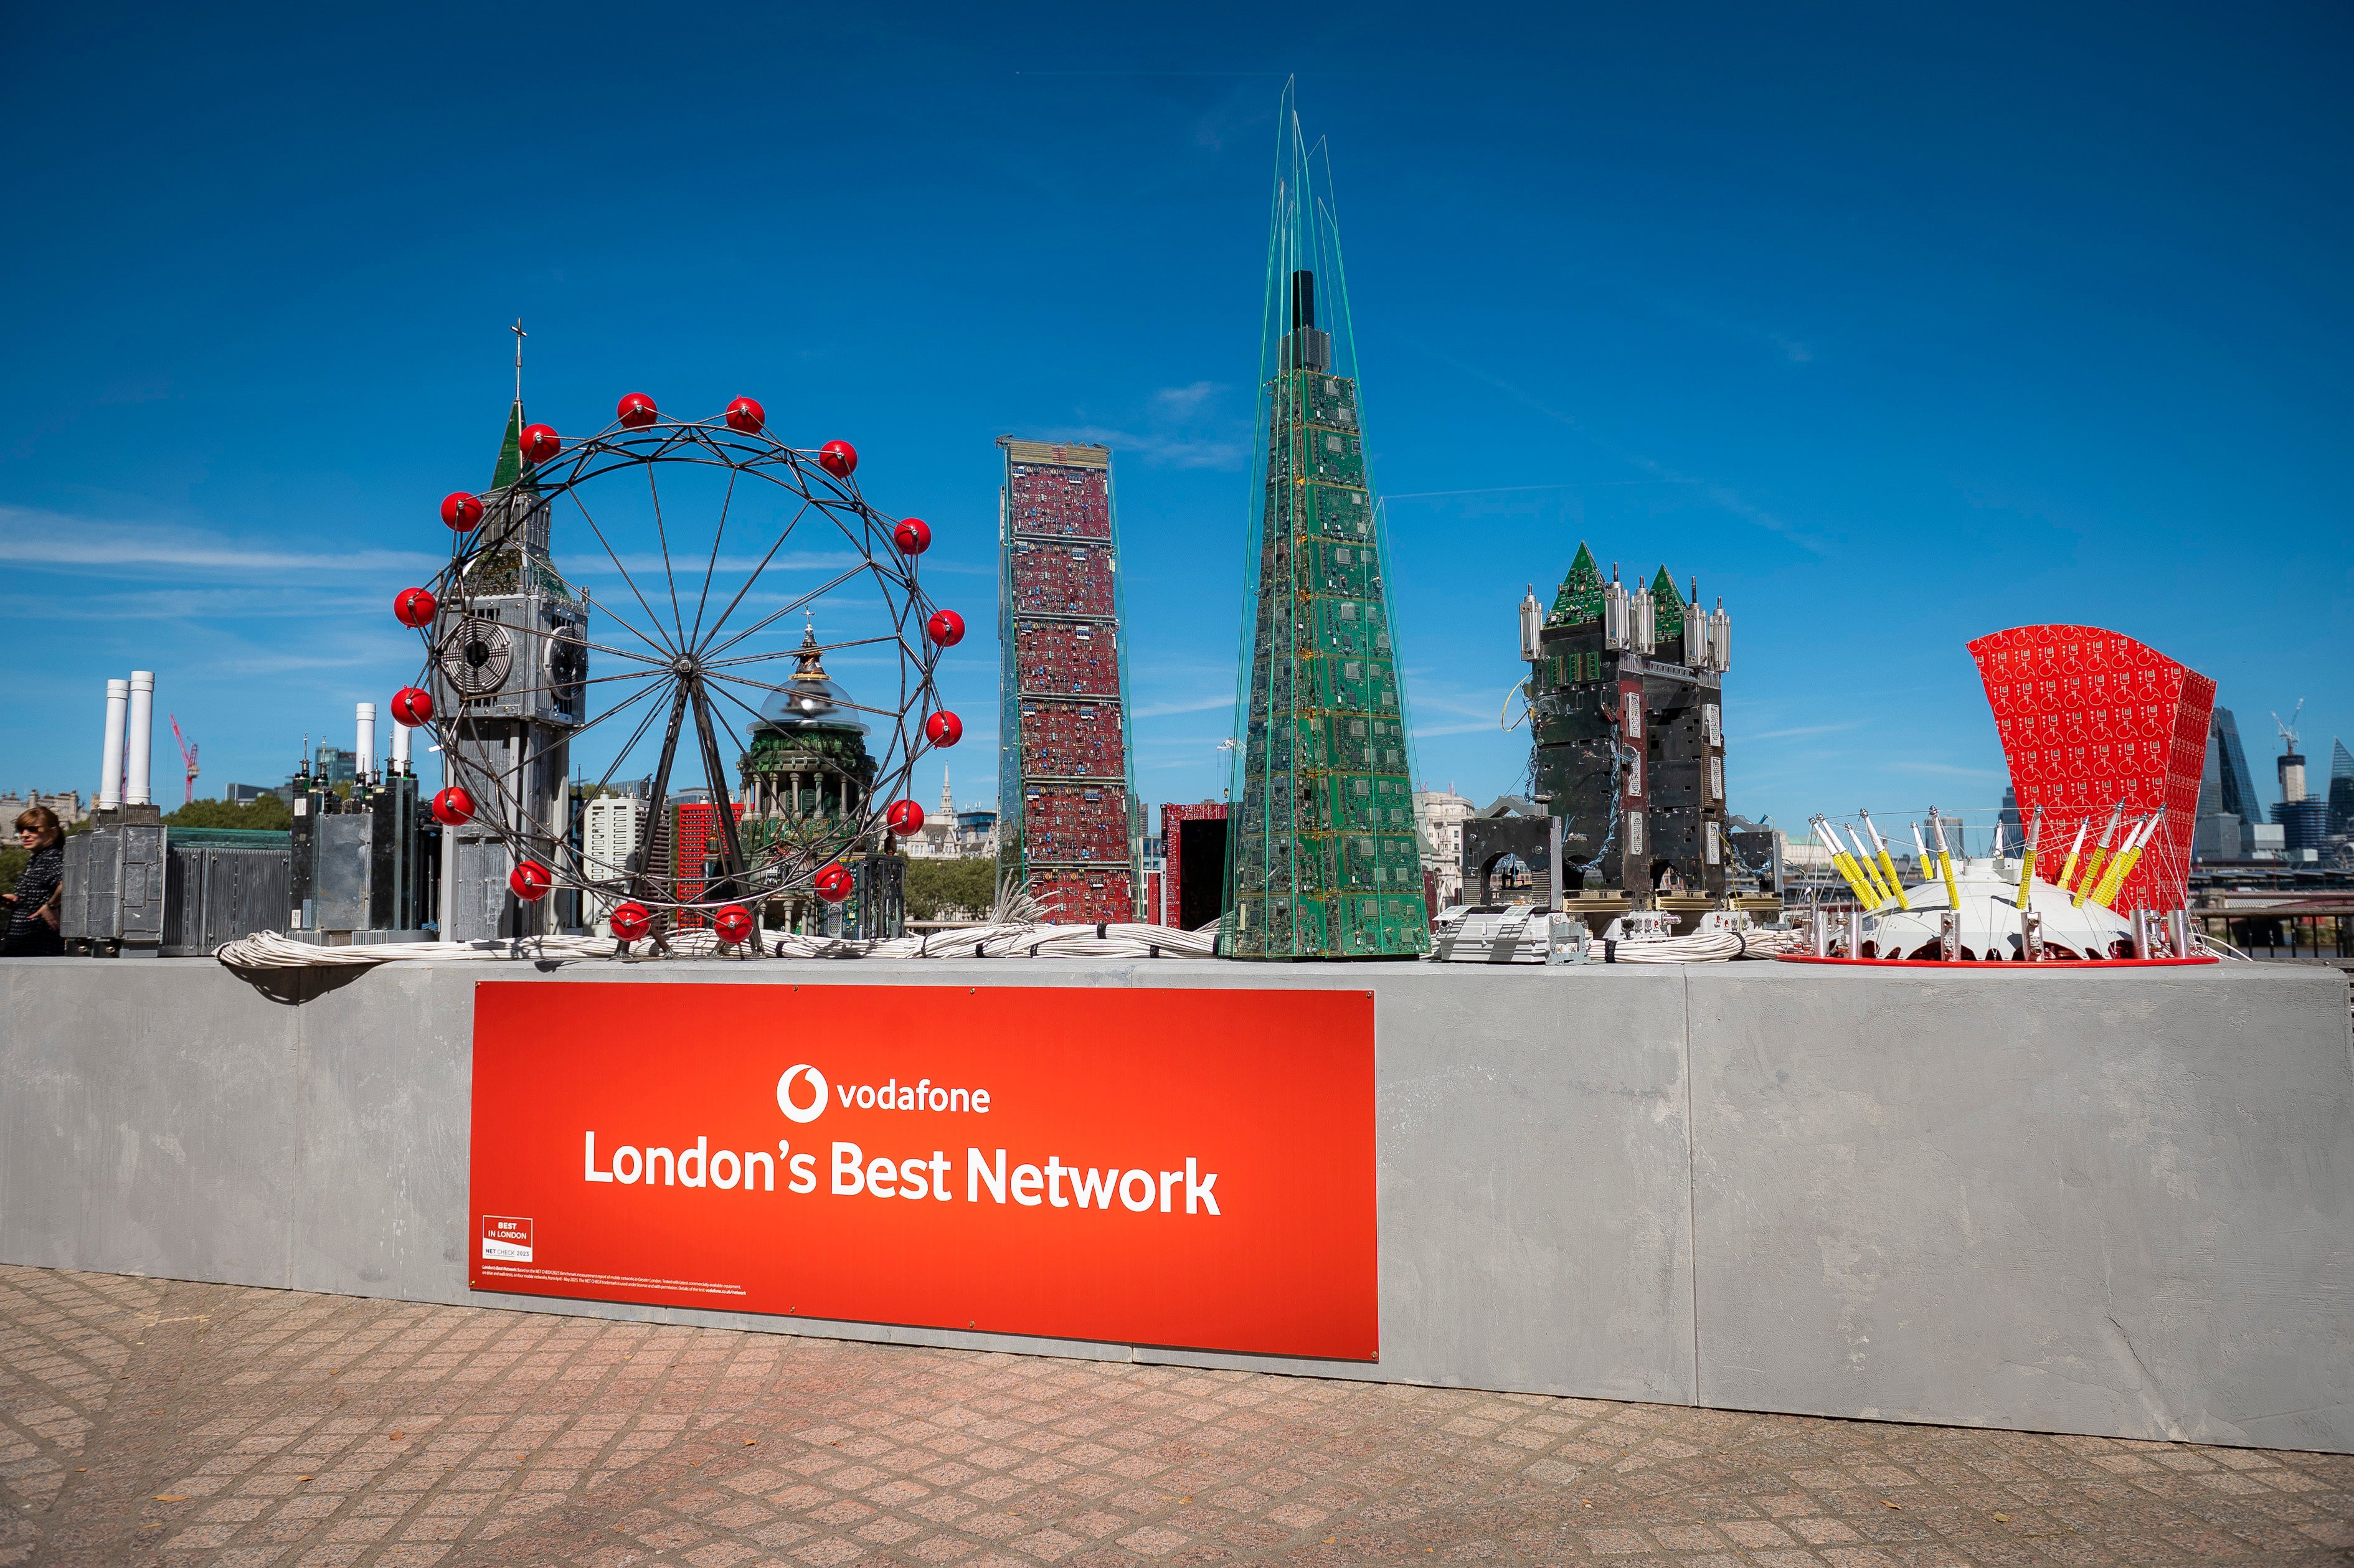 London South Bank: August 2023: Vodafone unveils ‘The Connected Skyline’ to celebrate being named London’s Best Network by NET CHECK . Vodafone commissioned London-based artist and sculptor, Alex Wreckage, to create the installation which is made from nearly a tonne of recycled tech, network equipment and SIMs